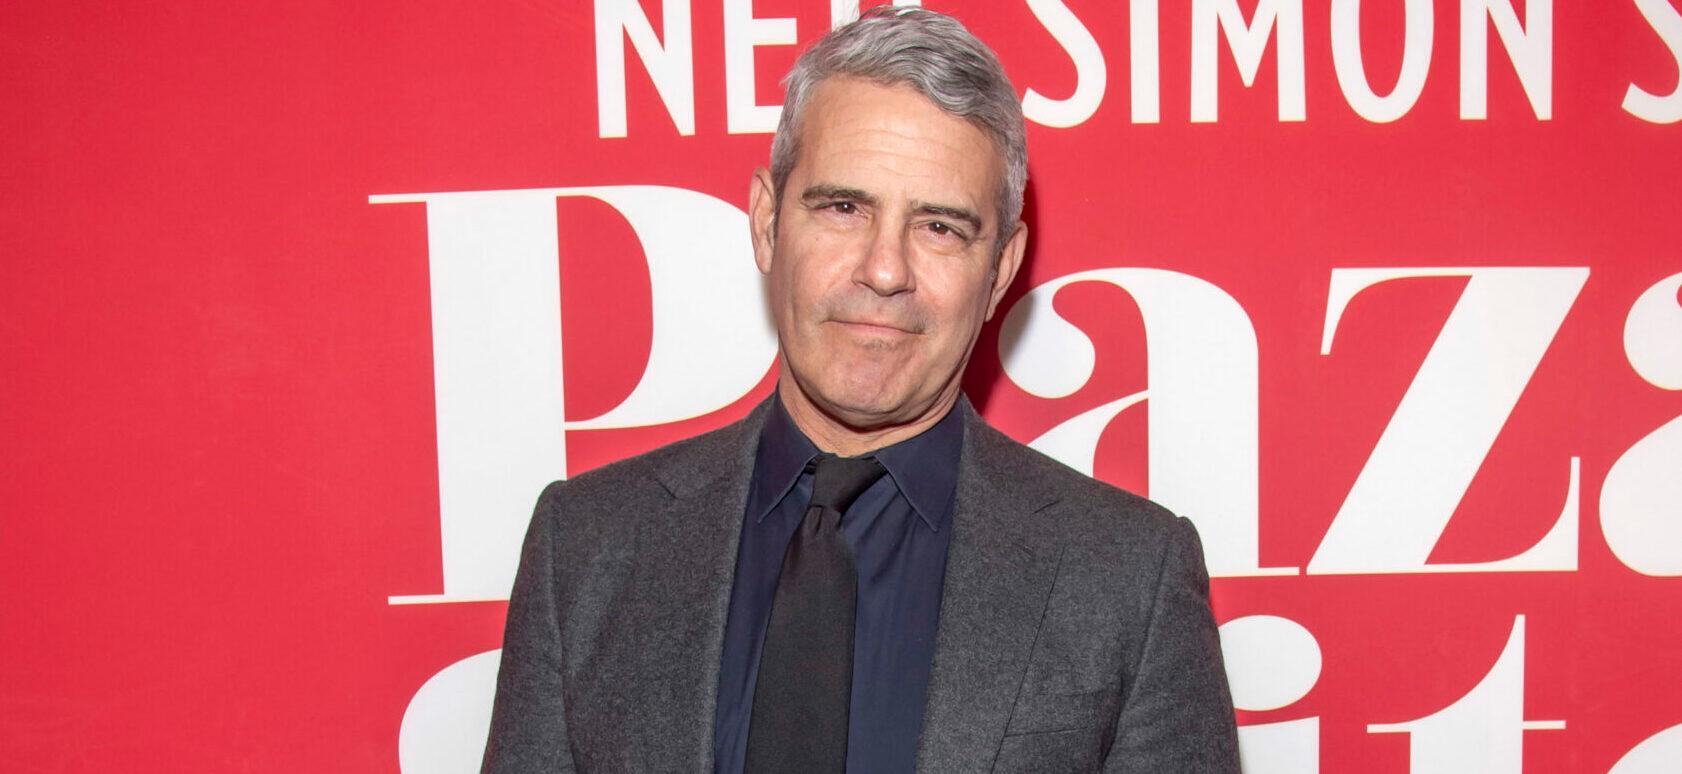 Andy Cohen at "Plaza Suite" Opening Night